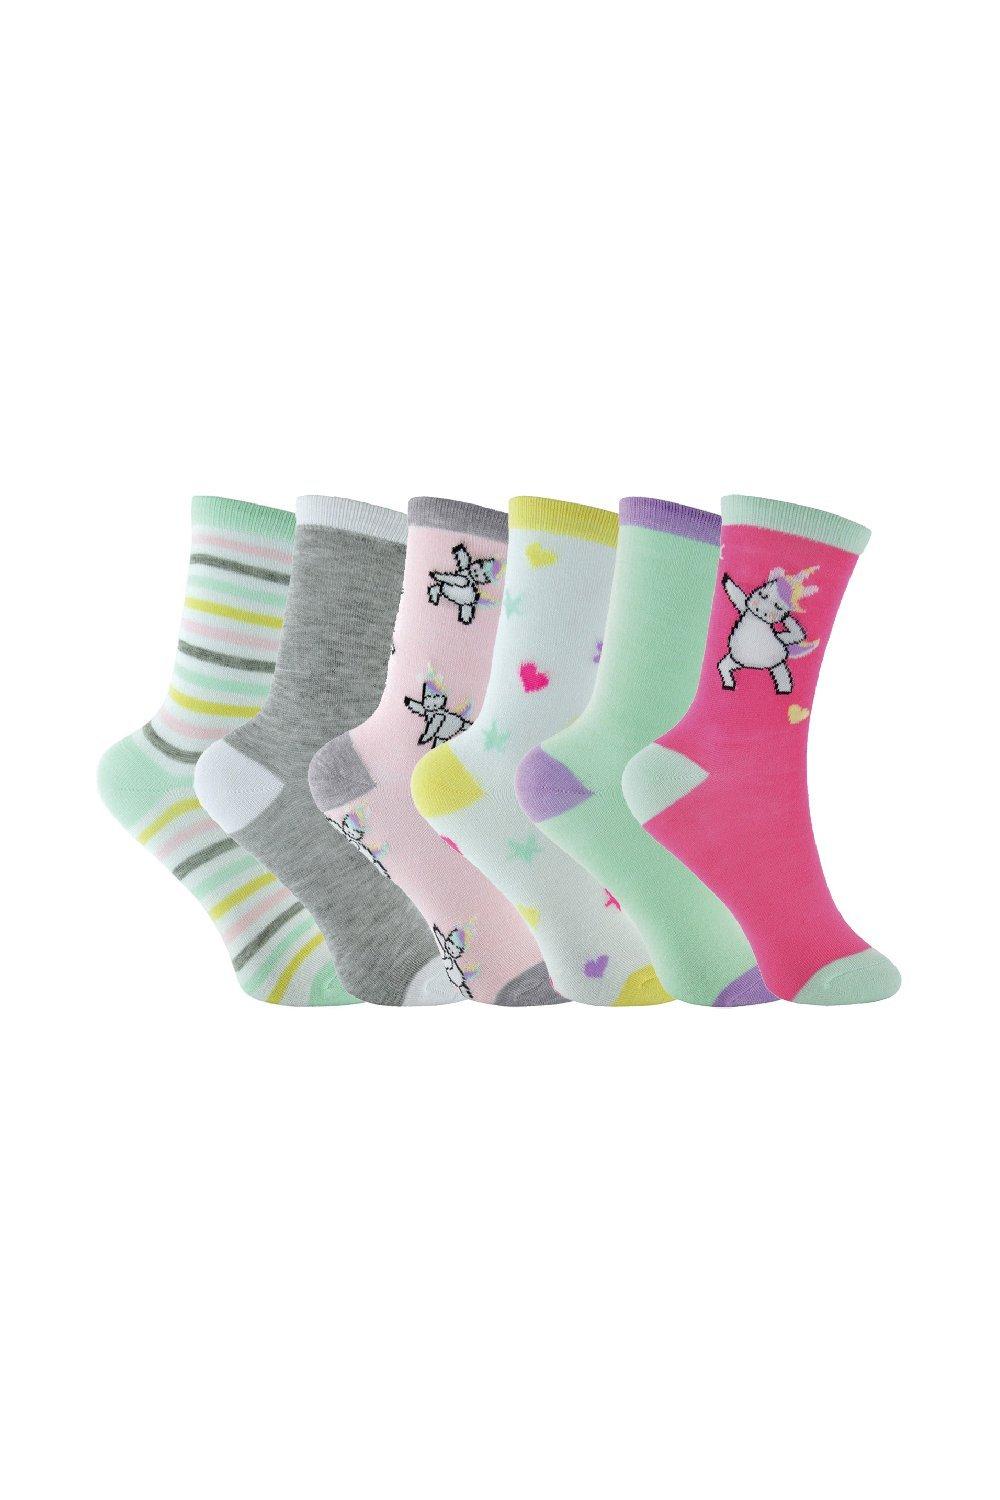 Buy Girls Socks & Underwear At   Express Shipping  Available – McKeever Sports UK